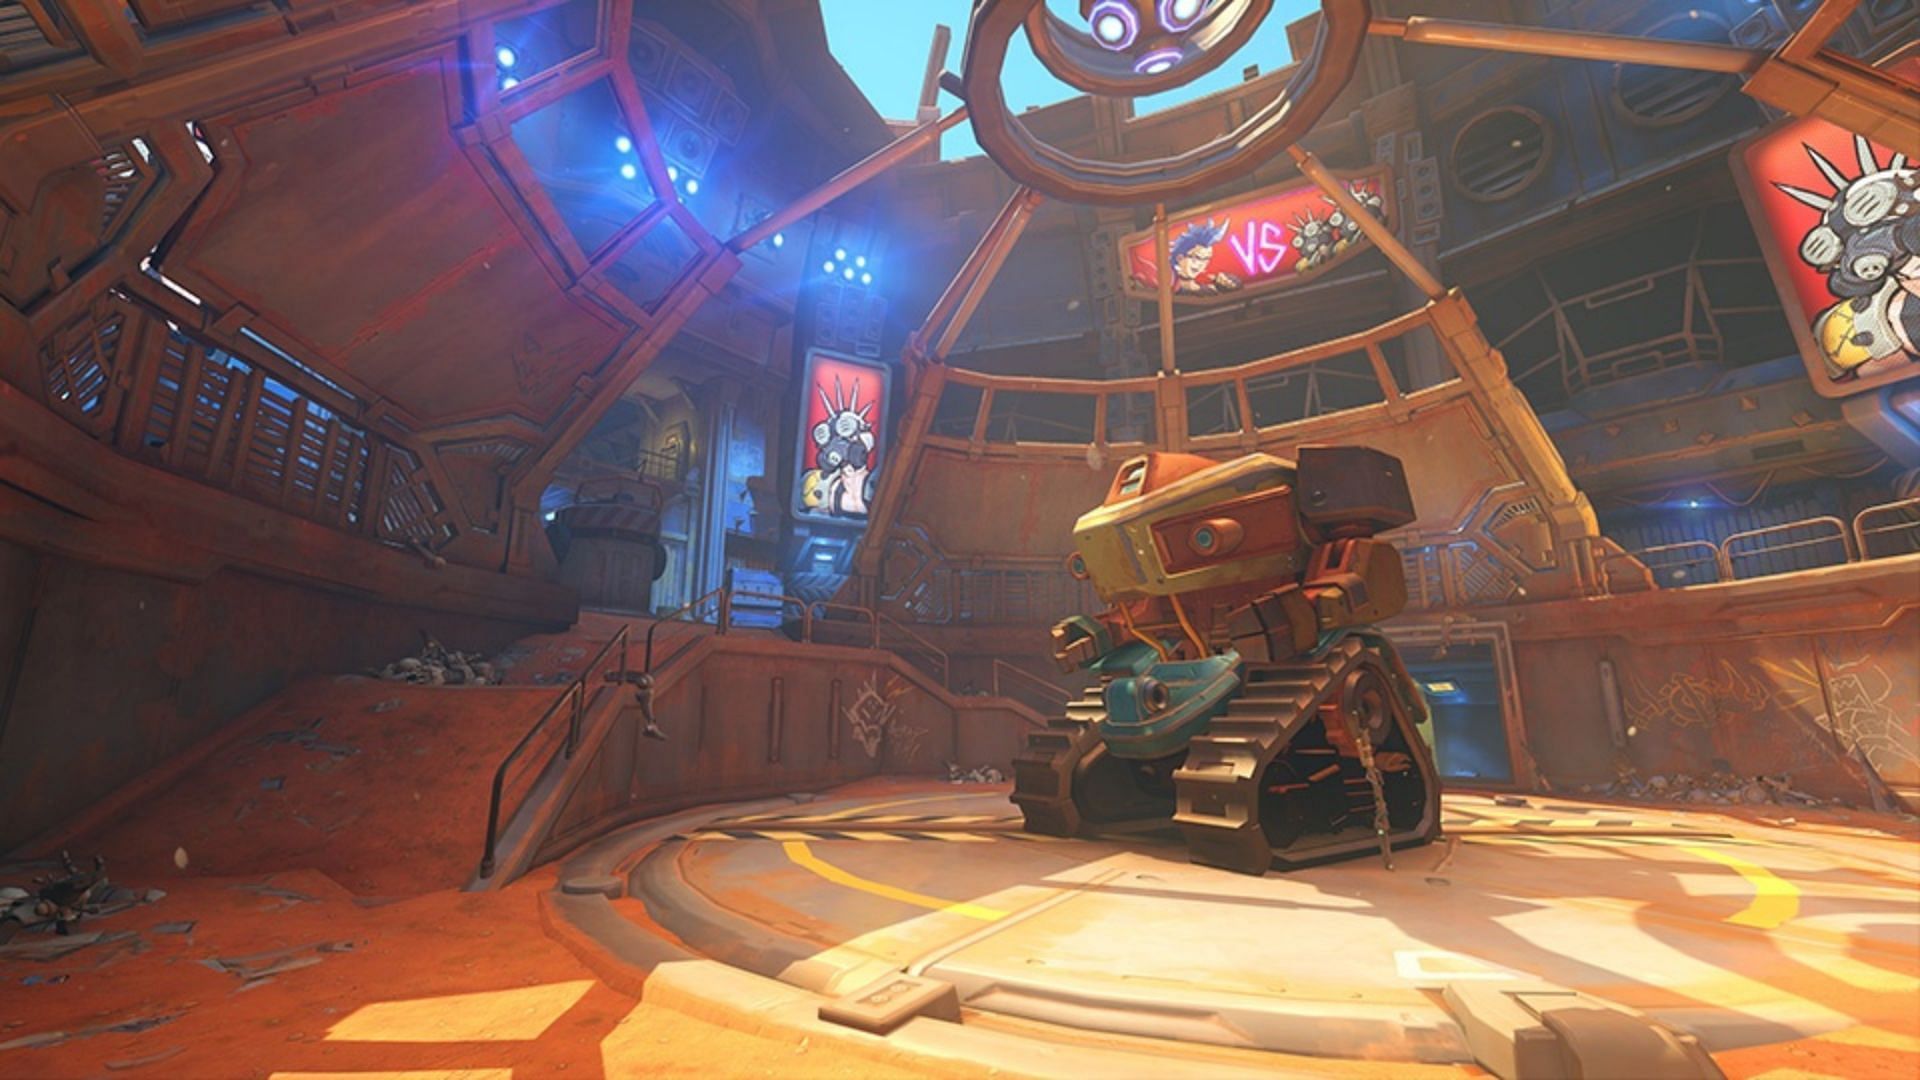 New Junk City in Overwatch 2(Image via Blizzard Entertainment)